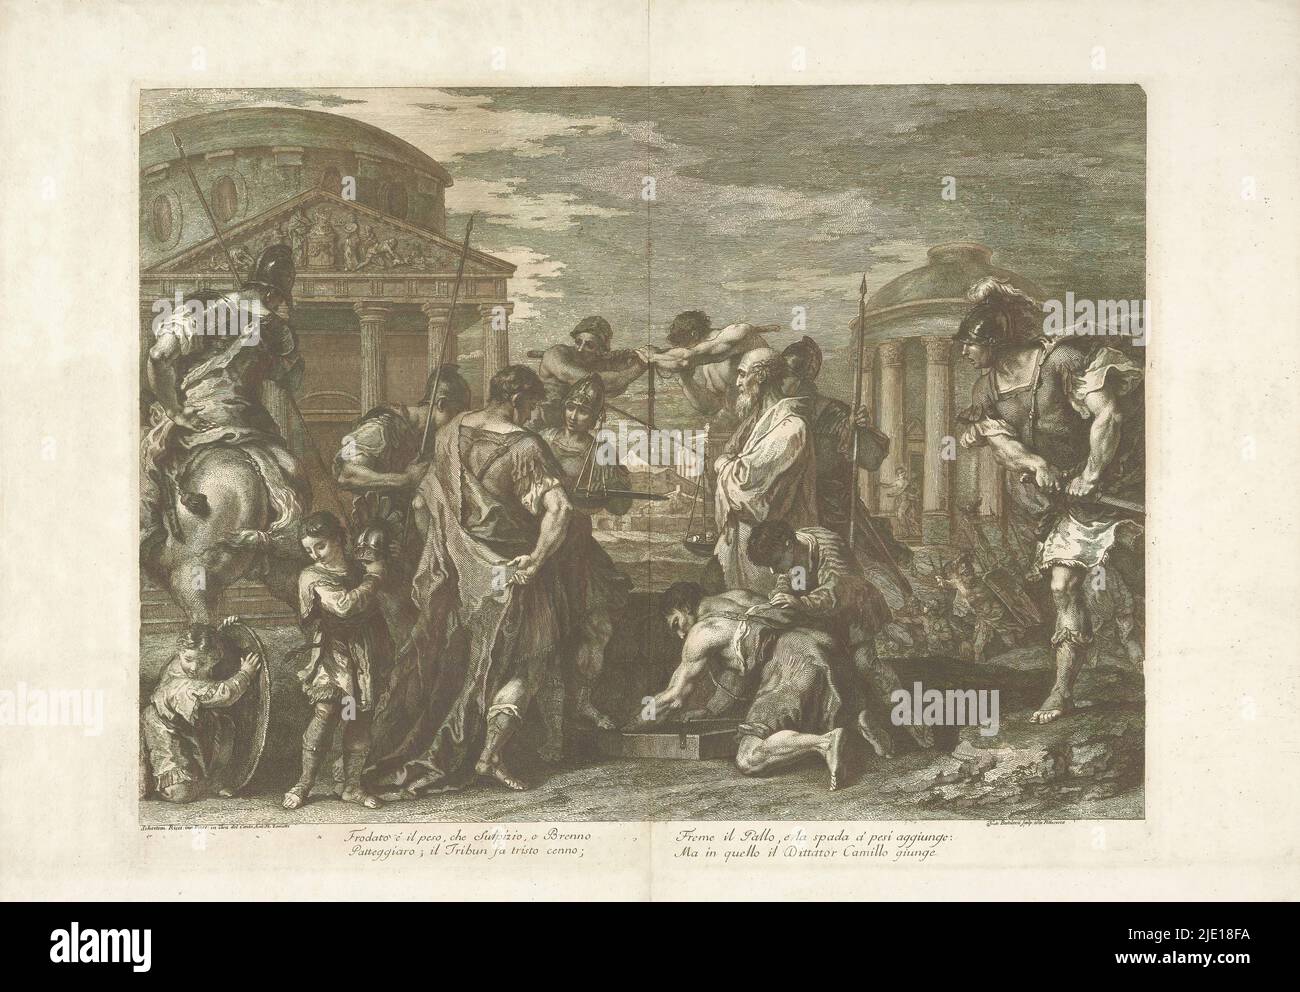 Furius Camillus liberates Rome besieged by Brennus, Furius Camillus liberates Rome besieged by Gallic leader Brennus. Camillus and his army approaching from the right. In the foreground a group of men. In the background classical buildings. Italian verse in two columns in lower margin., print maker: Francesco Bartolozzi, (mentioned on object), after painting by: Sebastiano Ricci, (mentioned on object), Anton Maria II Zanetti, (mentioned on object), Italy, 1738 - 1815, paper, etching, height 440 mm × width 560 mm Stock Photo